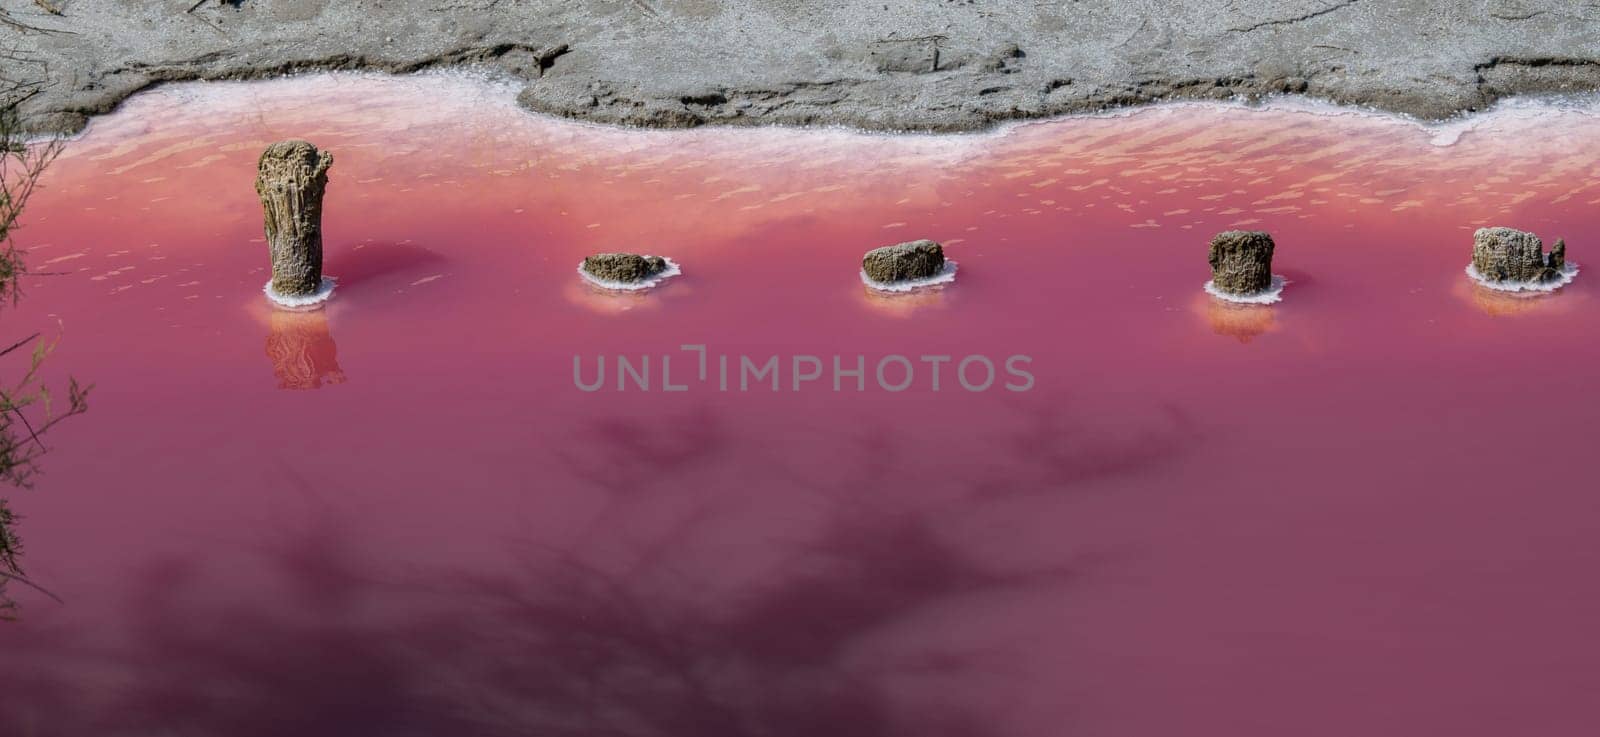 Wooden stakes corroded by salt and pink salt water, Camargue, Salin de Guiraud, France, High quality photo